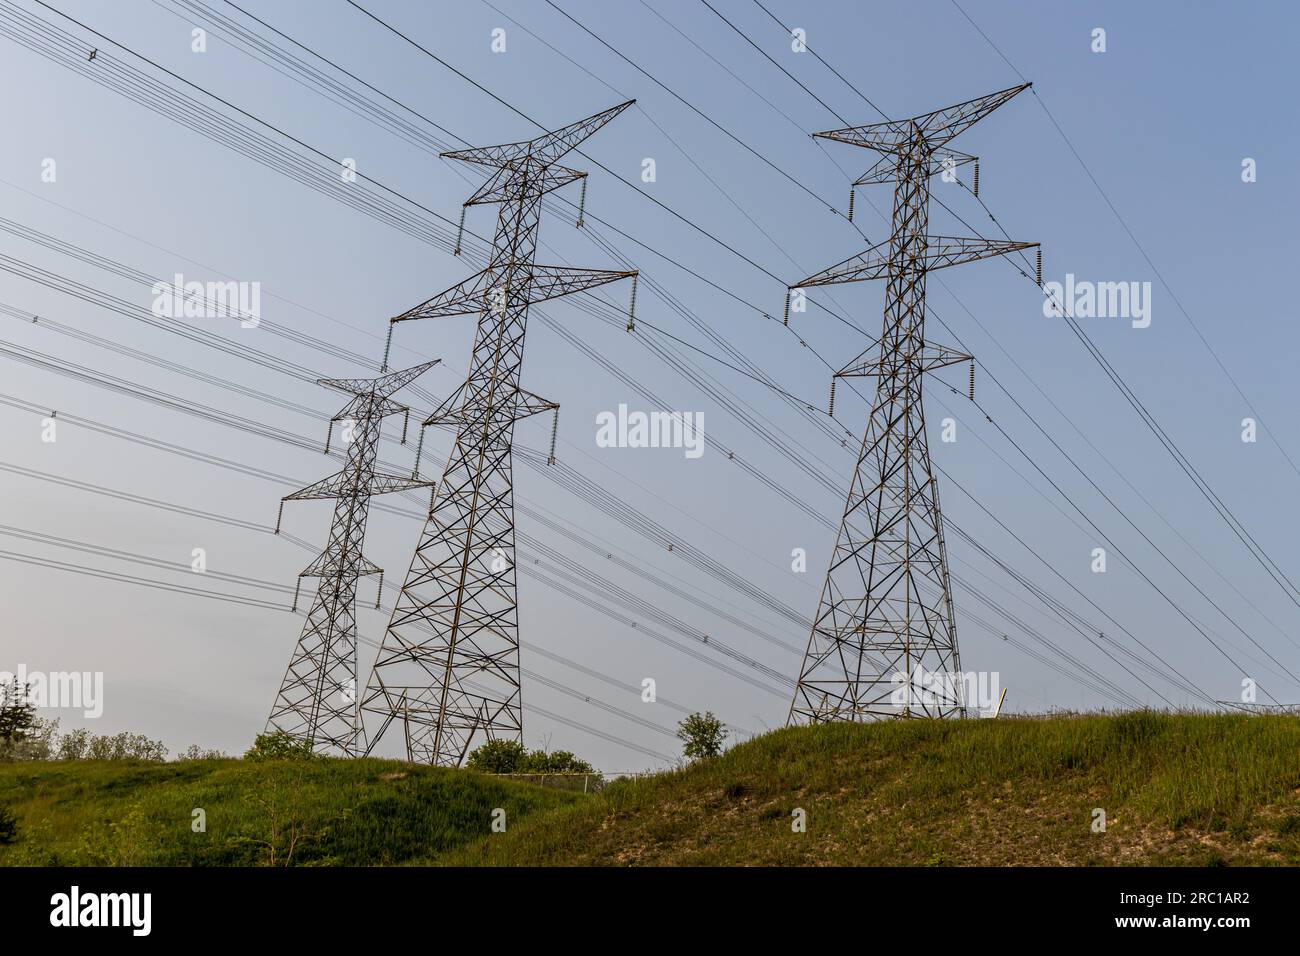 High voltage power lines - metal power grid - grass hill background. Taken in Toronto, Canada. Stock Photo